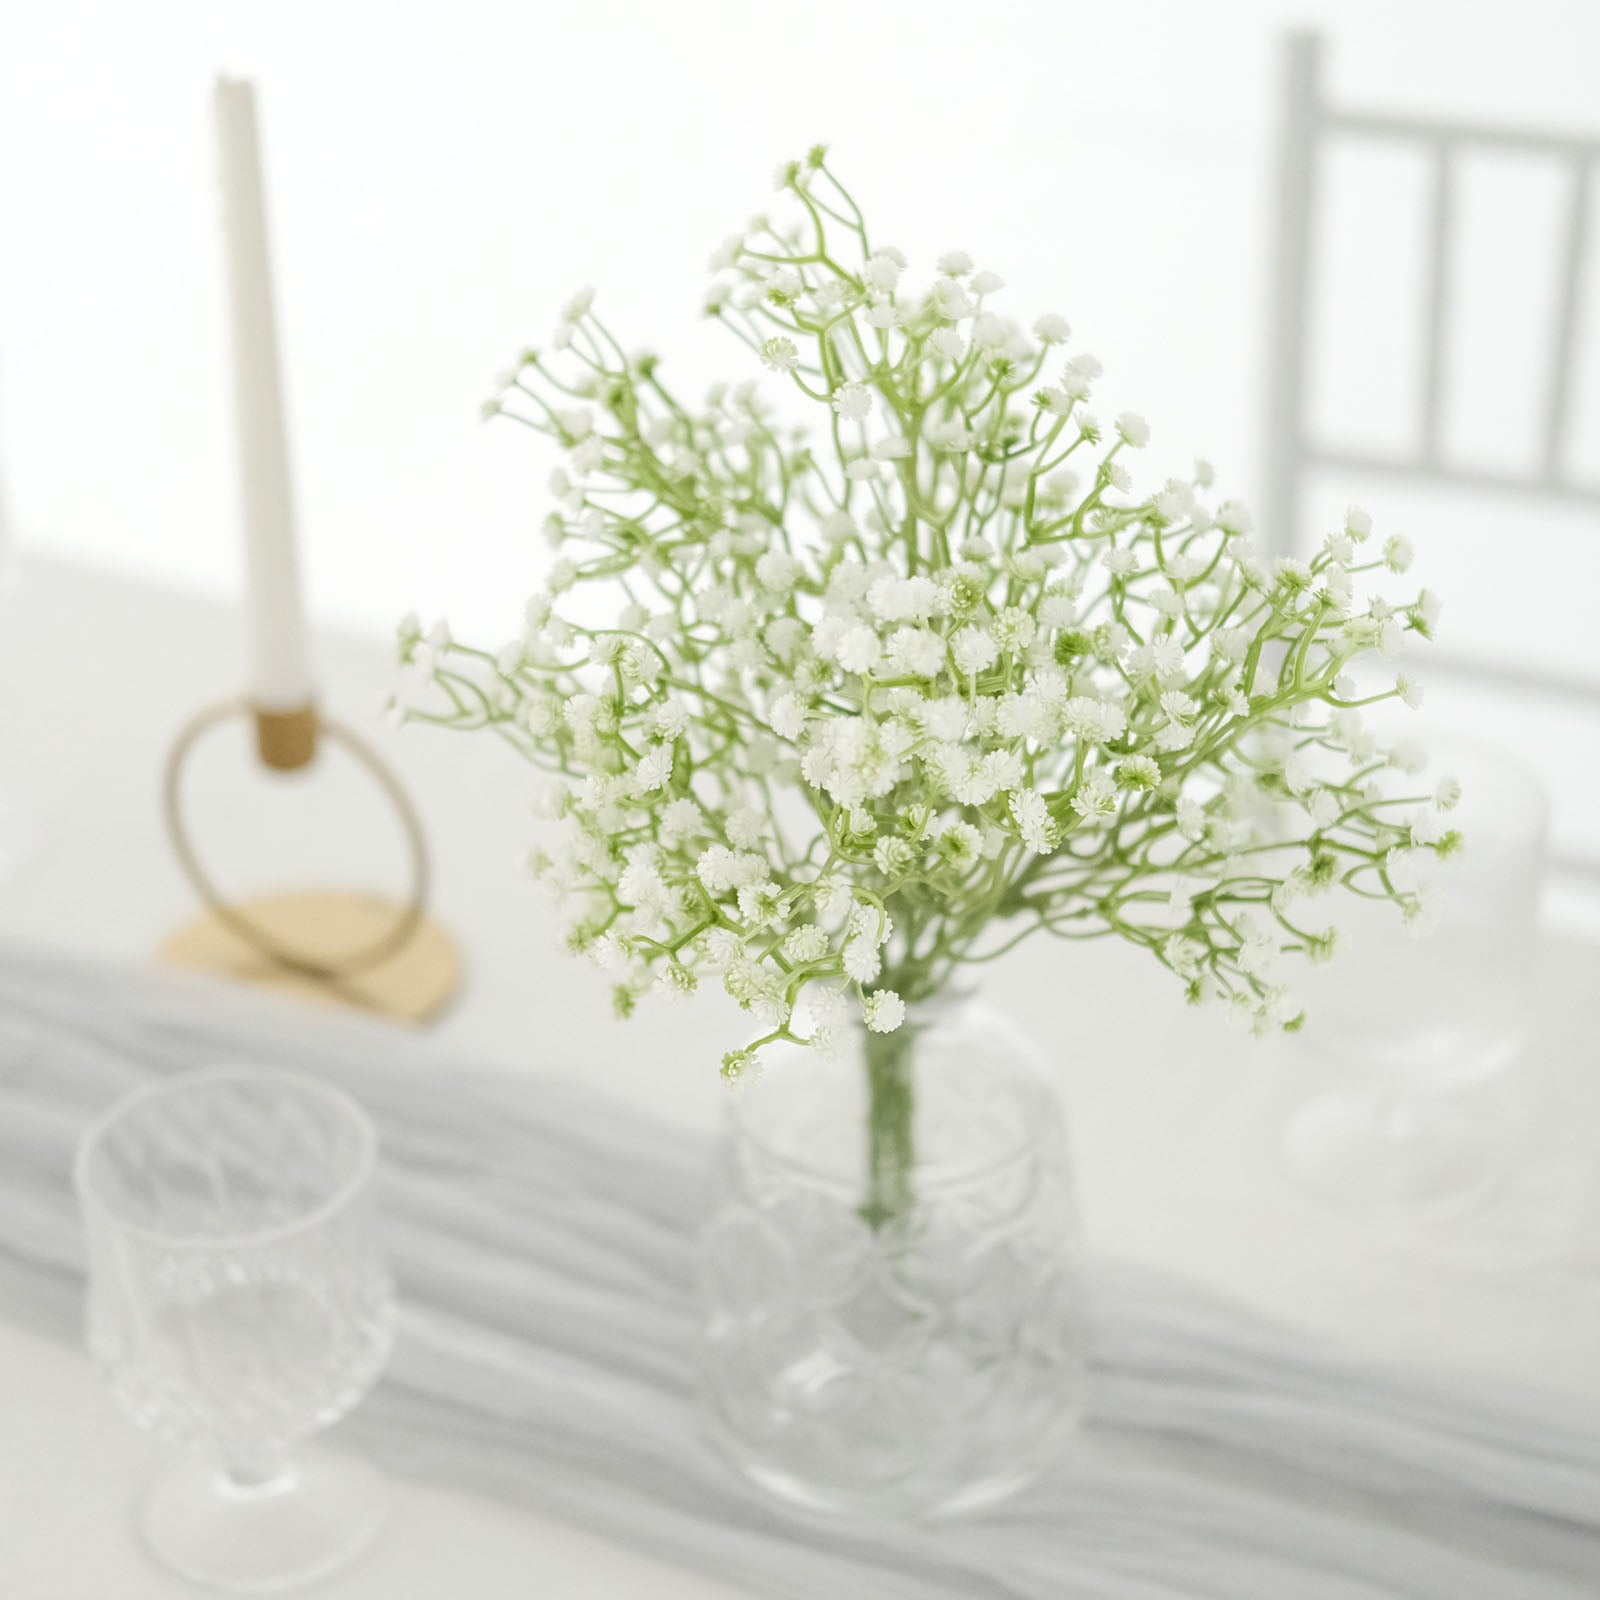 3 Bushes | White 14 Artificial Baby’s Breath Gypsophila Flower Arrangements, Real Touch Indoor Faux Floral Bouquets | by Tableclothsfactory